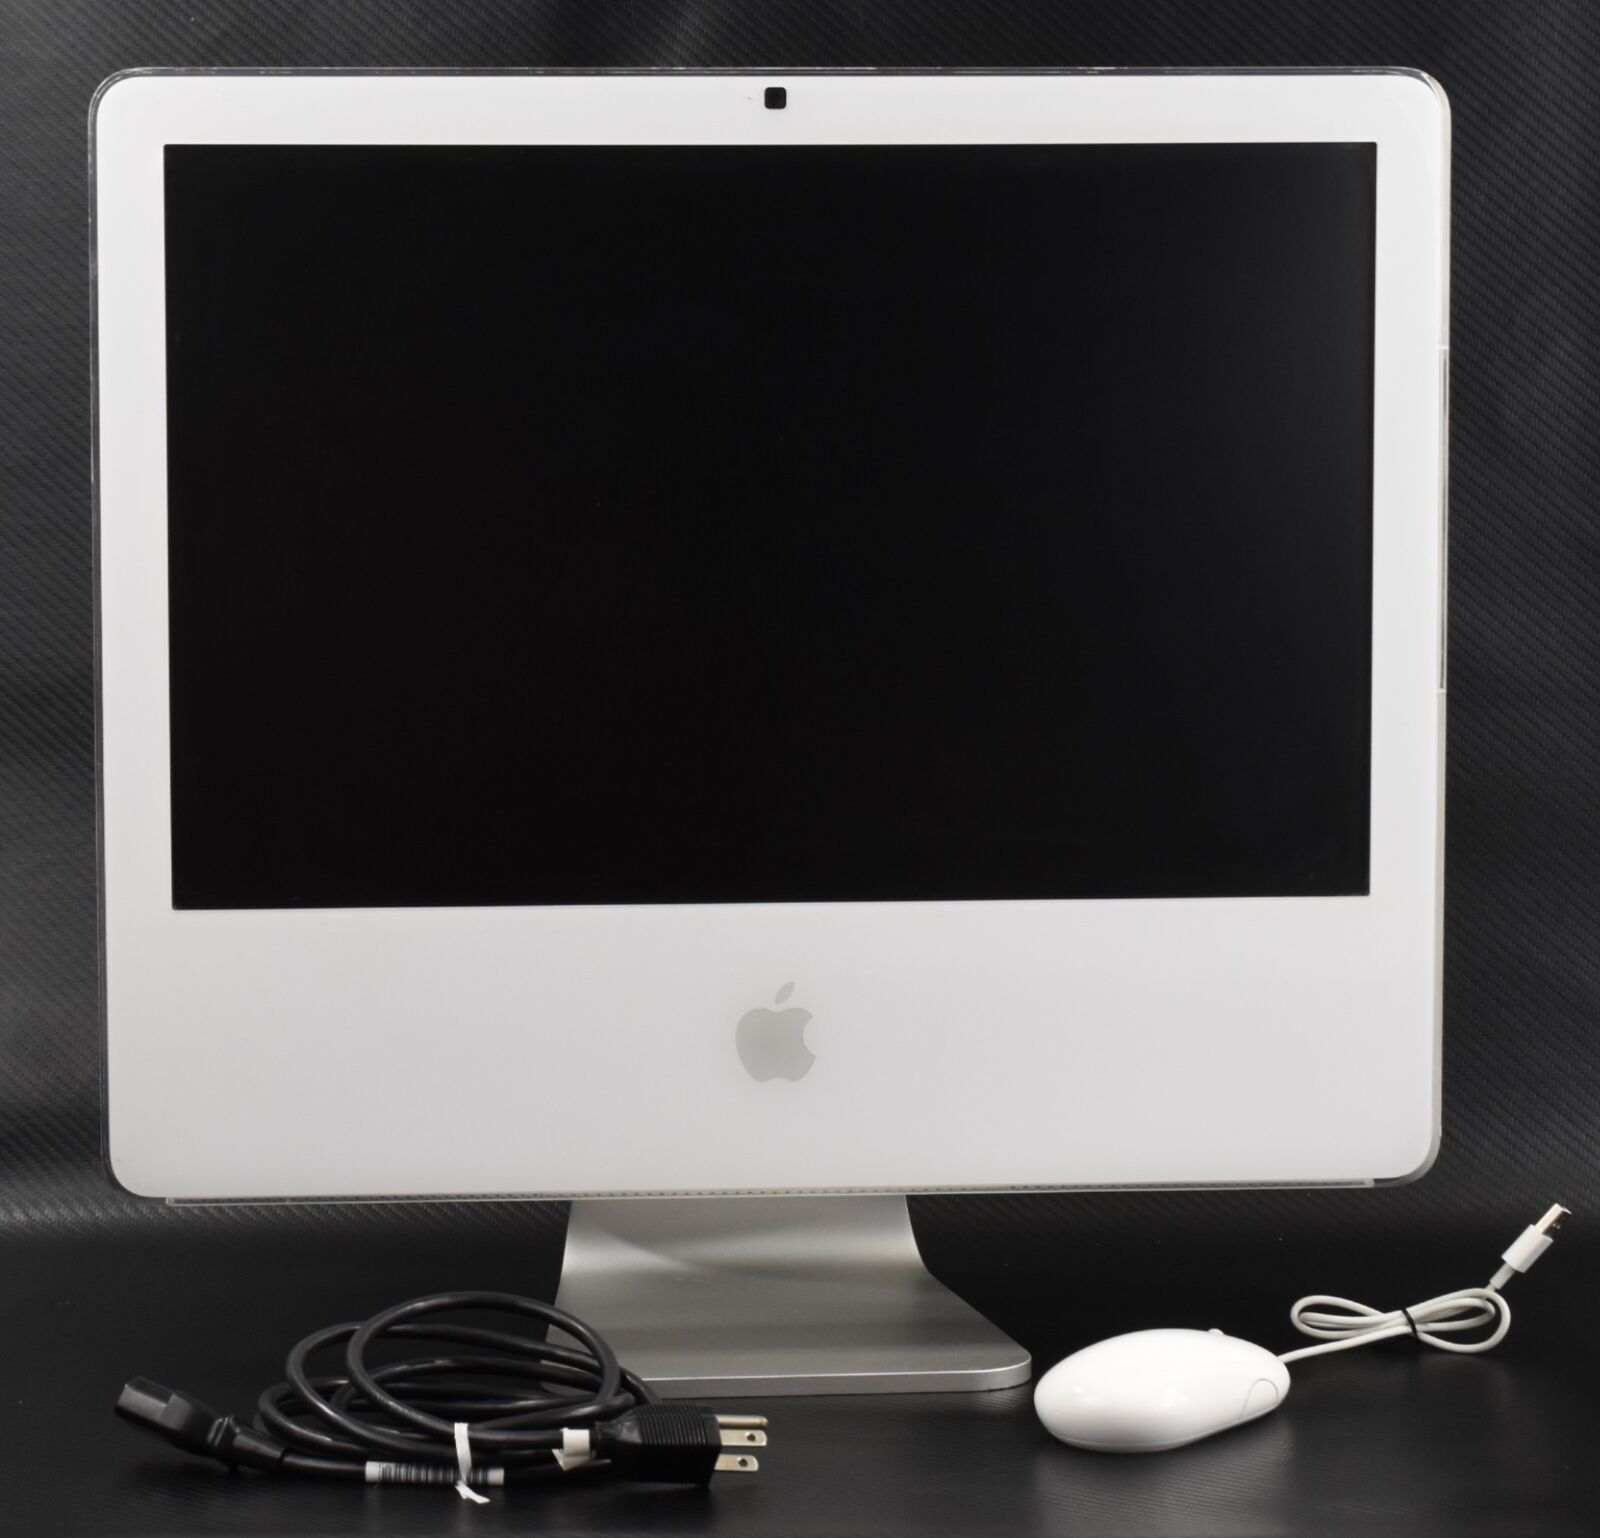 Vtg Apple iMac All-In-One White Desktop Computer G5 w/Cable & OEM Mouse As Is